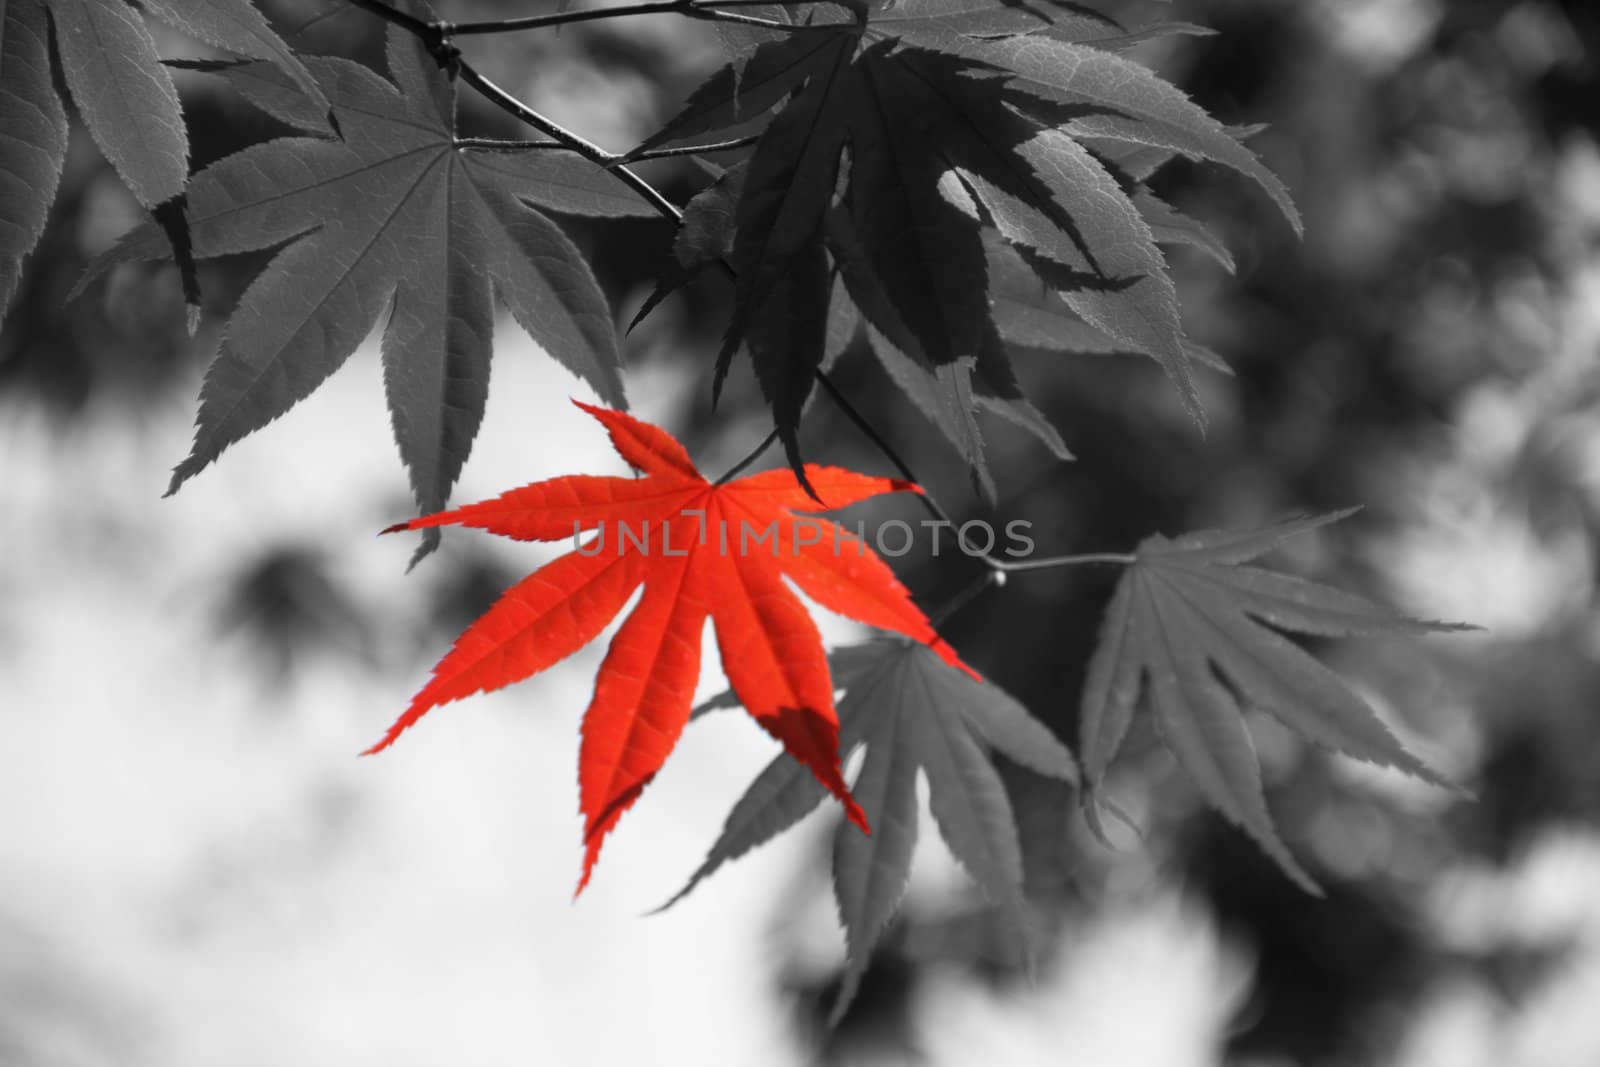 Colorful foliage standing out in this selective color image.